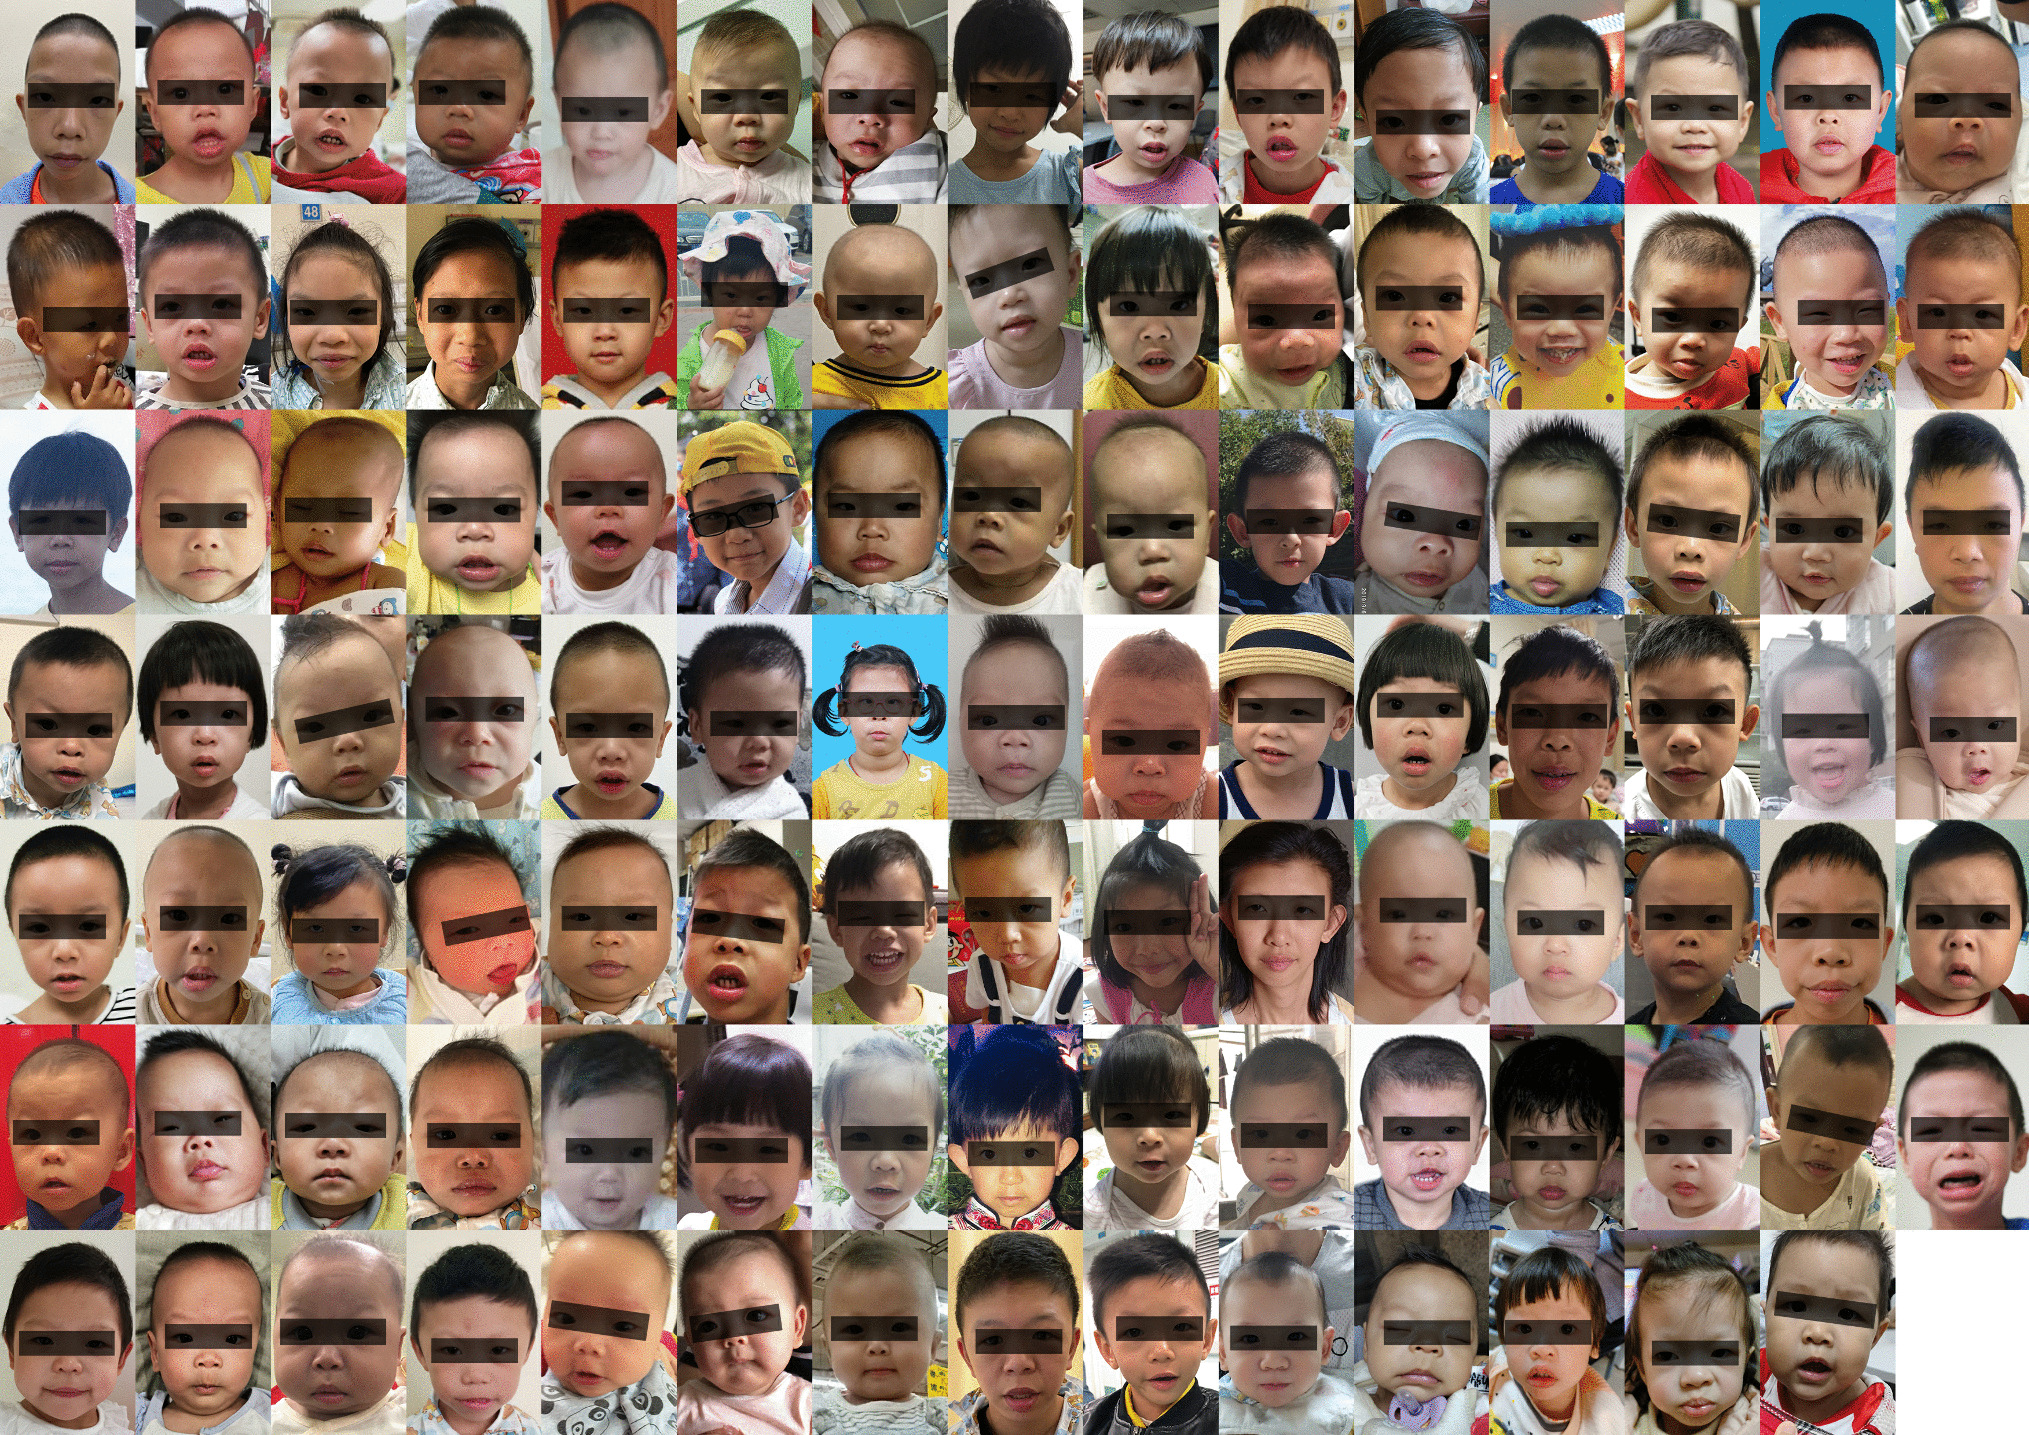 Optimization and evaluation of facial recognition models for Williams-Beuren syndrome